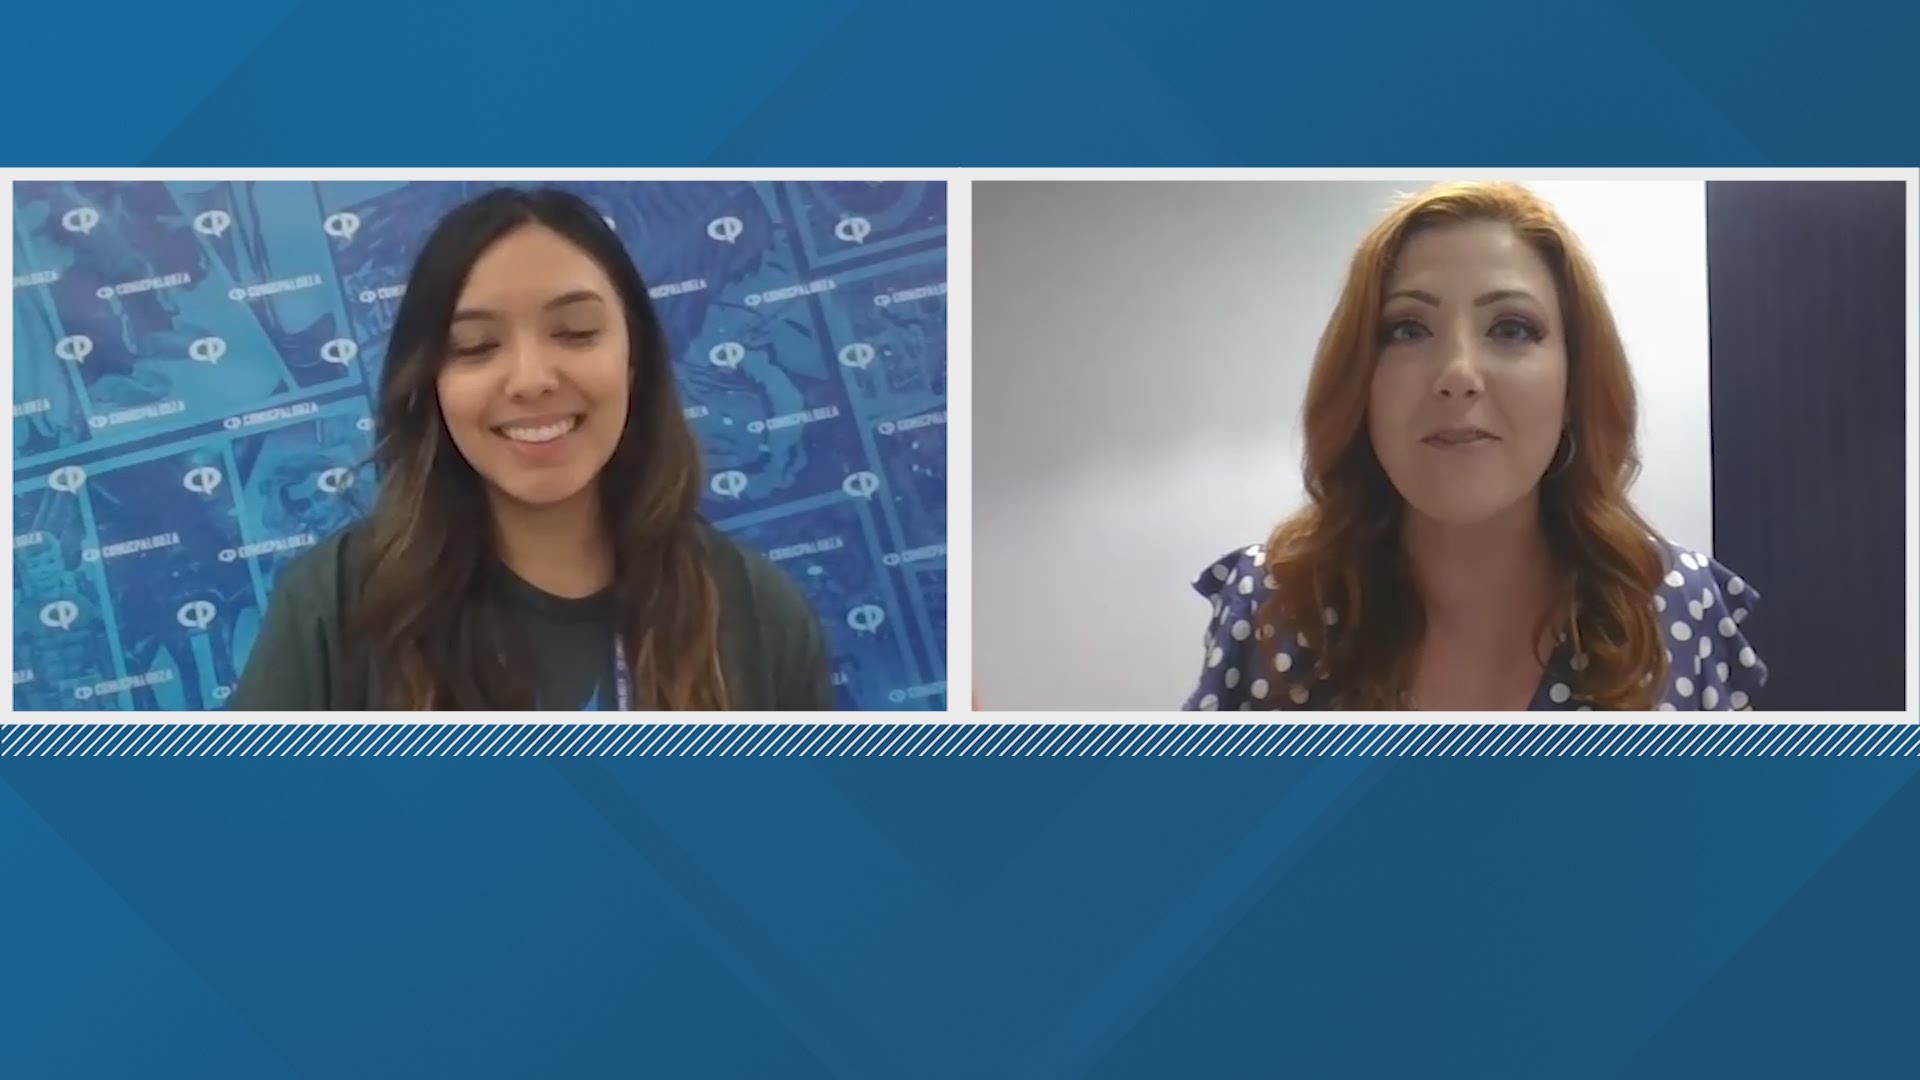 Norma Diaz with Houston First chats with Brandi Smith about what we can look forward to as Comicpalooza returns to Houston's GRB.